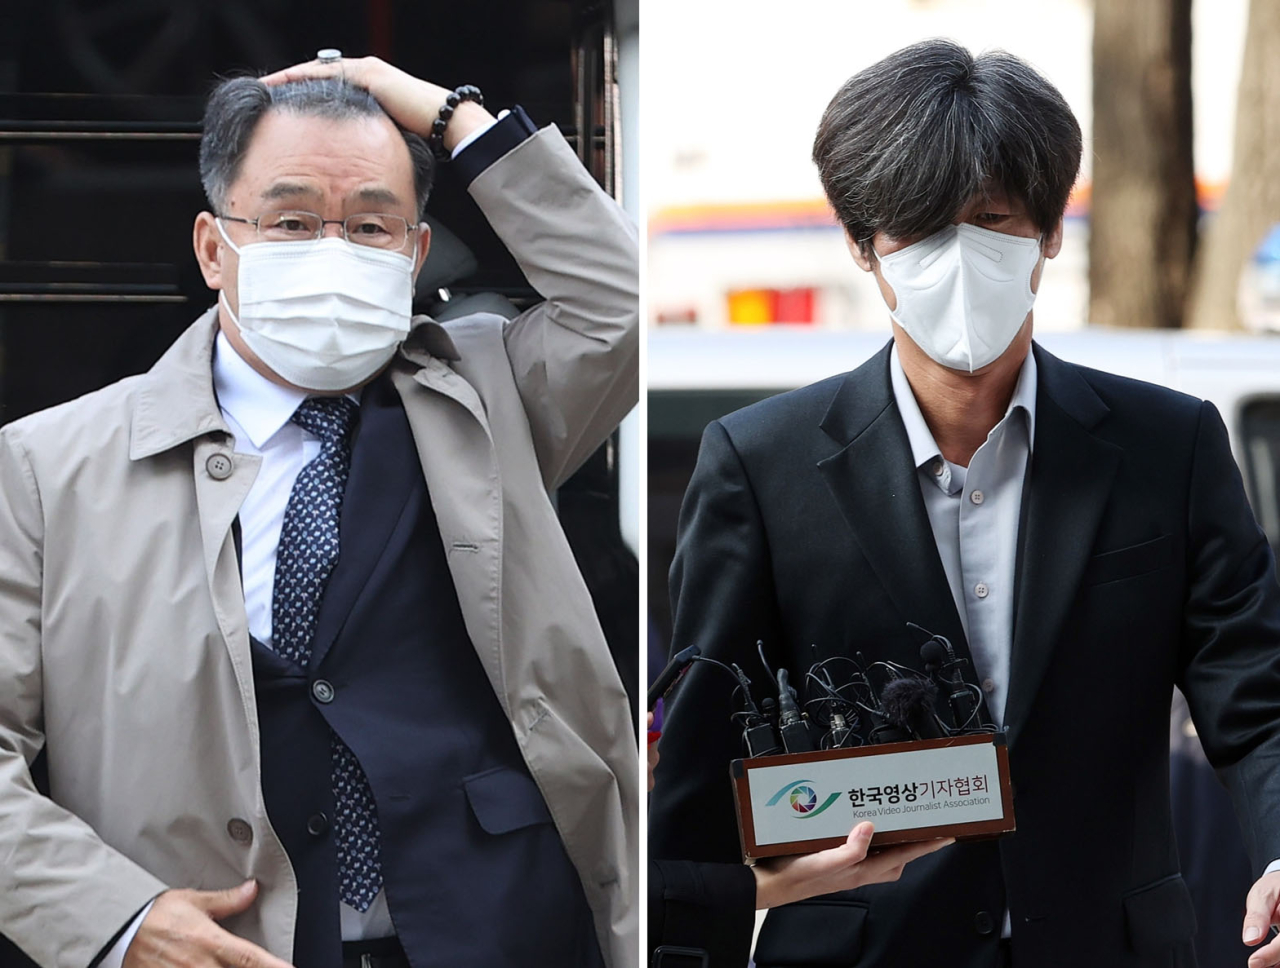 Kim Man-bae (left) and Nam Wook (right). The two figures were put under arrest early Thursday in connection to prosecutors' investigation on a land development scandal. (Yonhap)